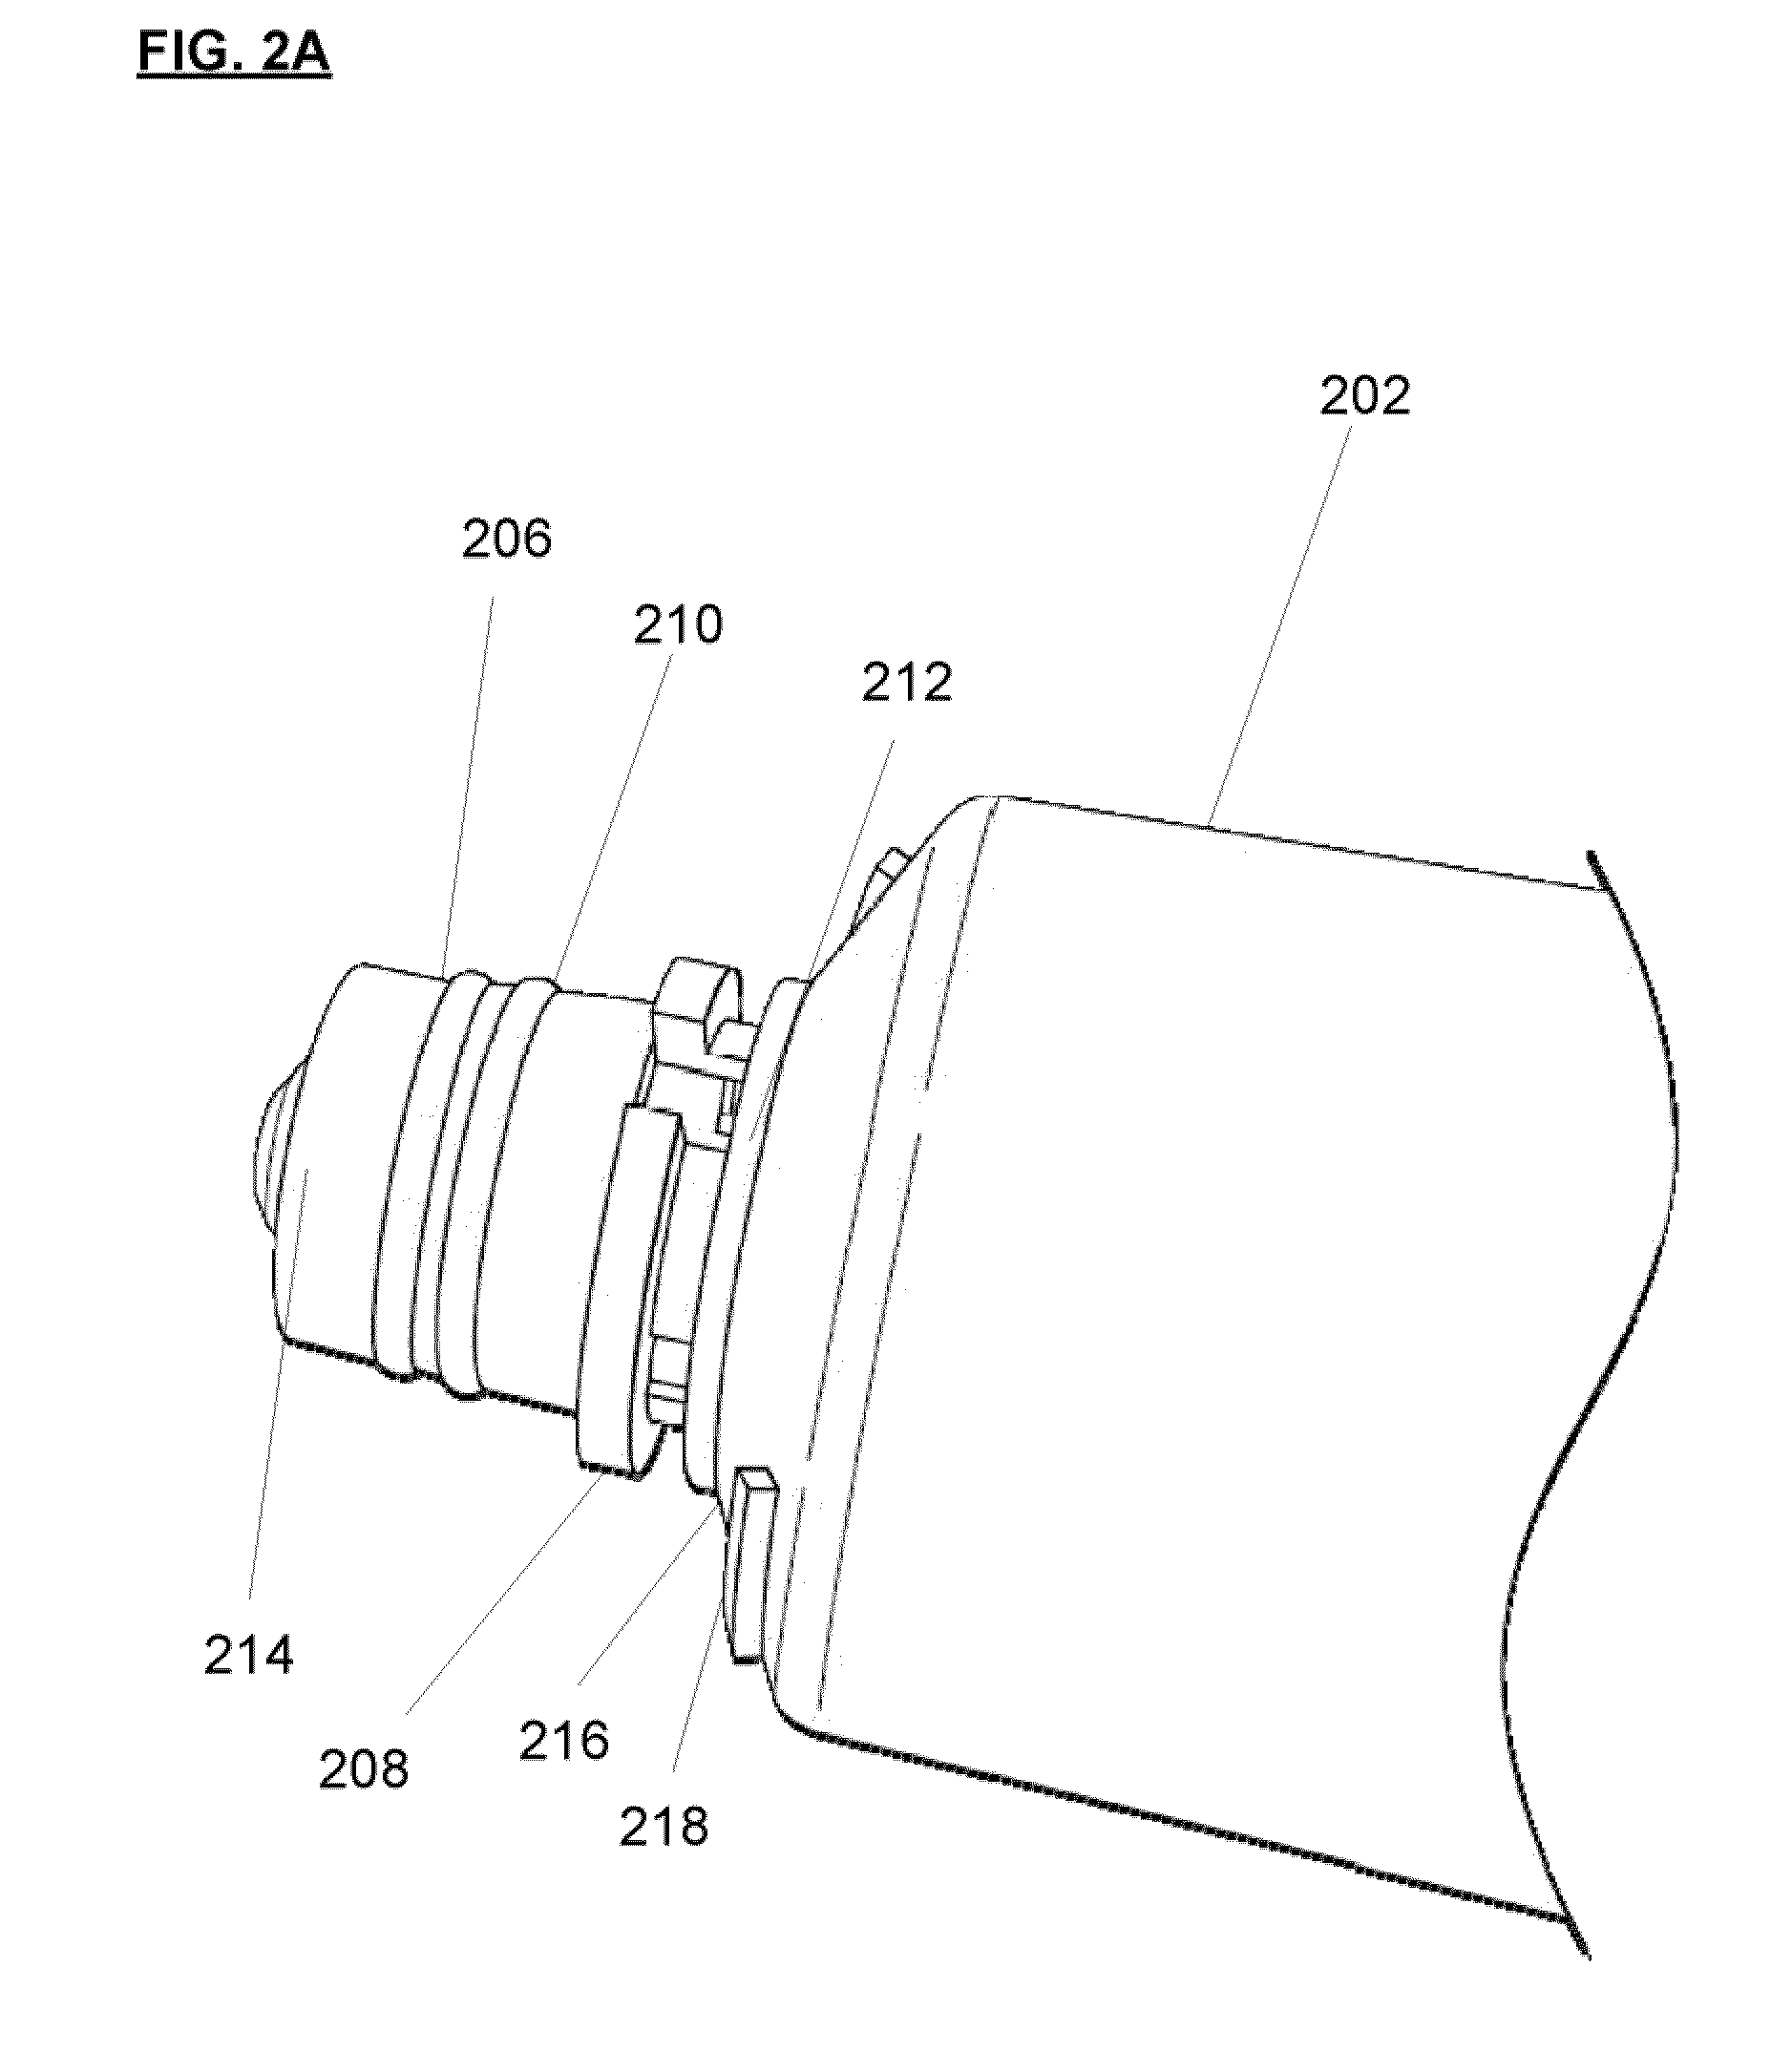 Apparatus for simultaneously dispensing two products